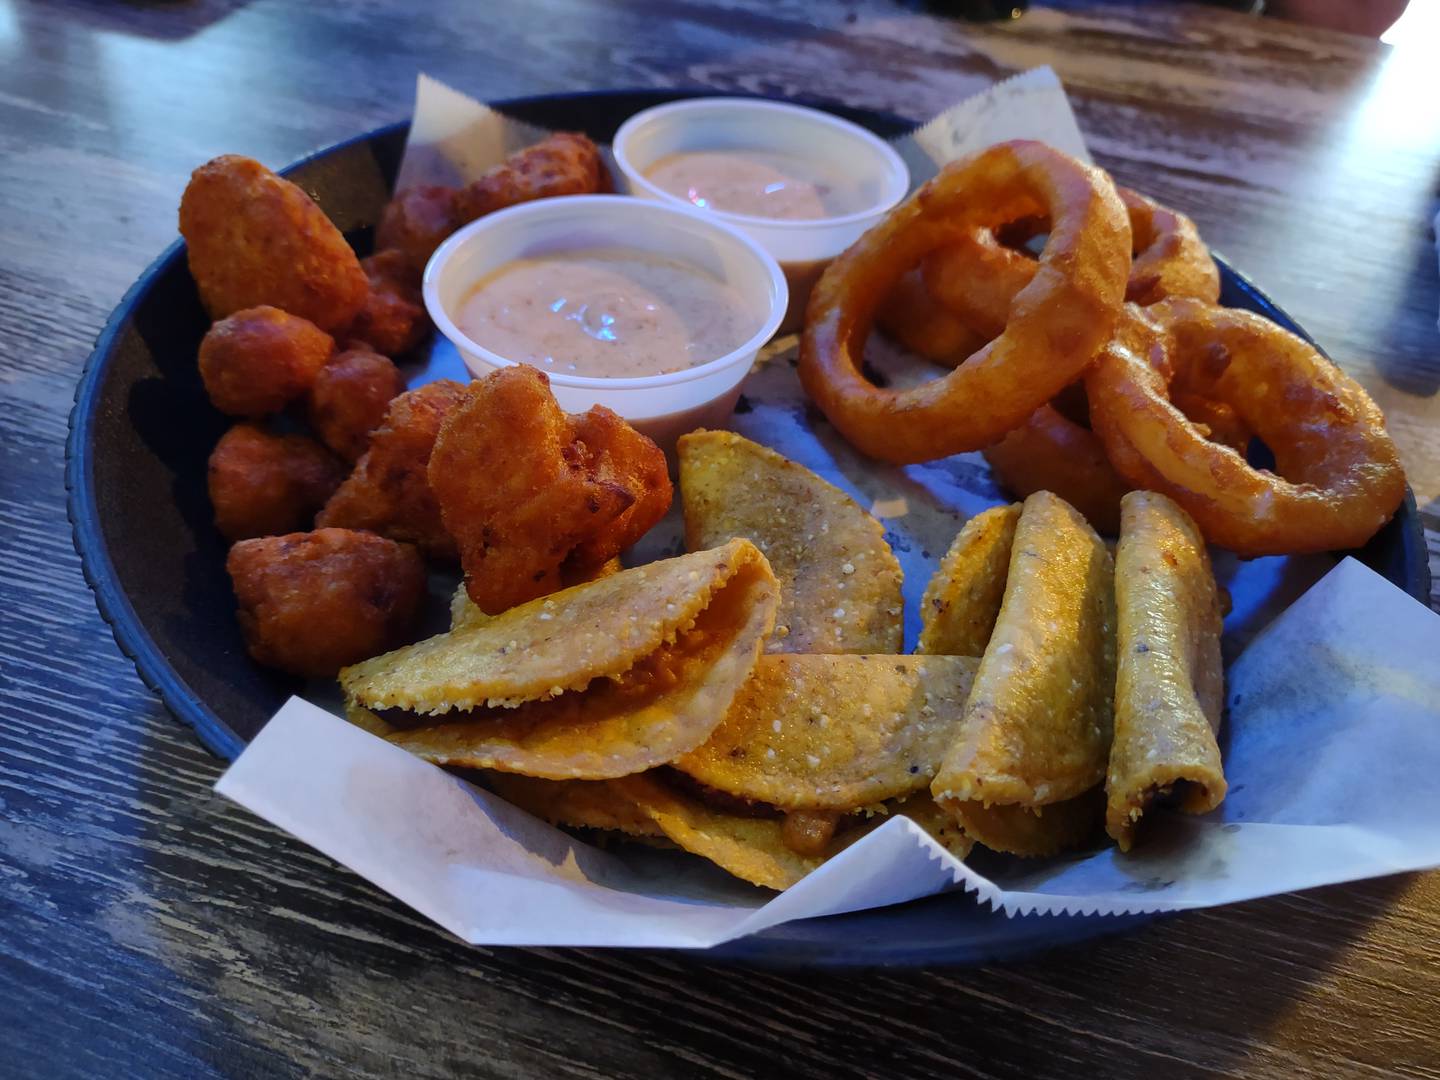 Ziggy's Bar & Grill in downtown Marseille offers more than a dozen starters.  One option is the Pick Three, which allows diners to choose from fries, tater tots, refried green beans, mini tacos, onion rings, pickle fries, fried mushrooms and breaded cauliflower spicy.